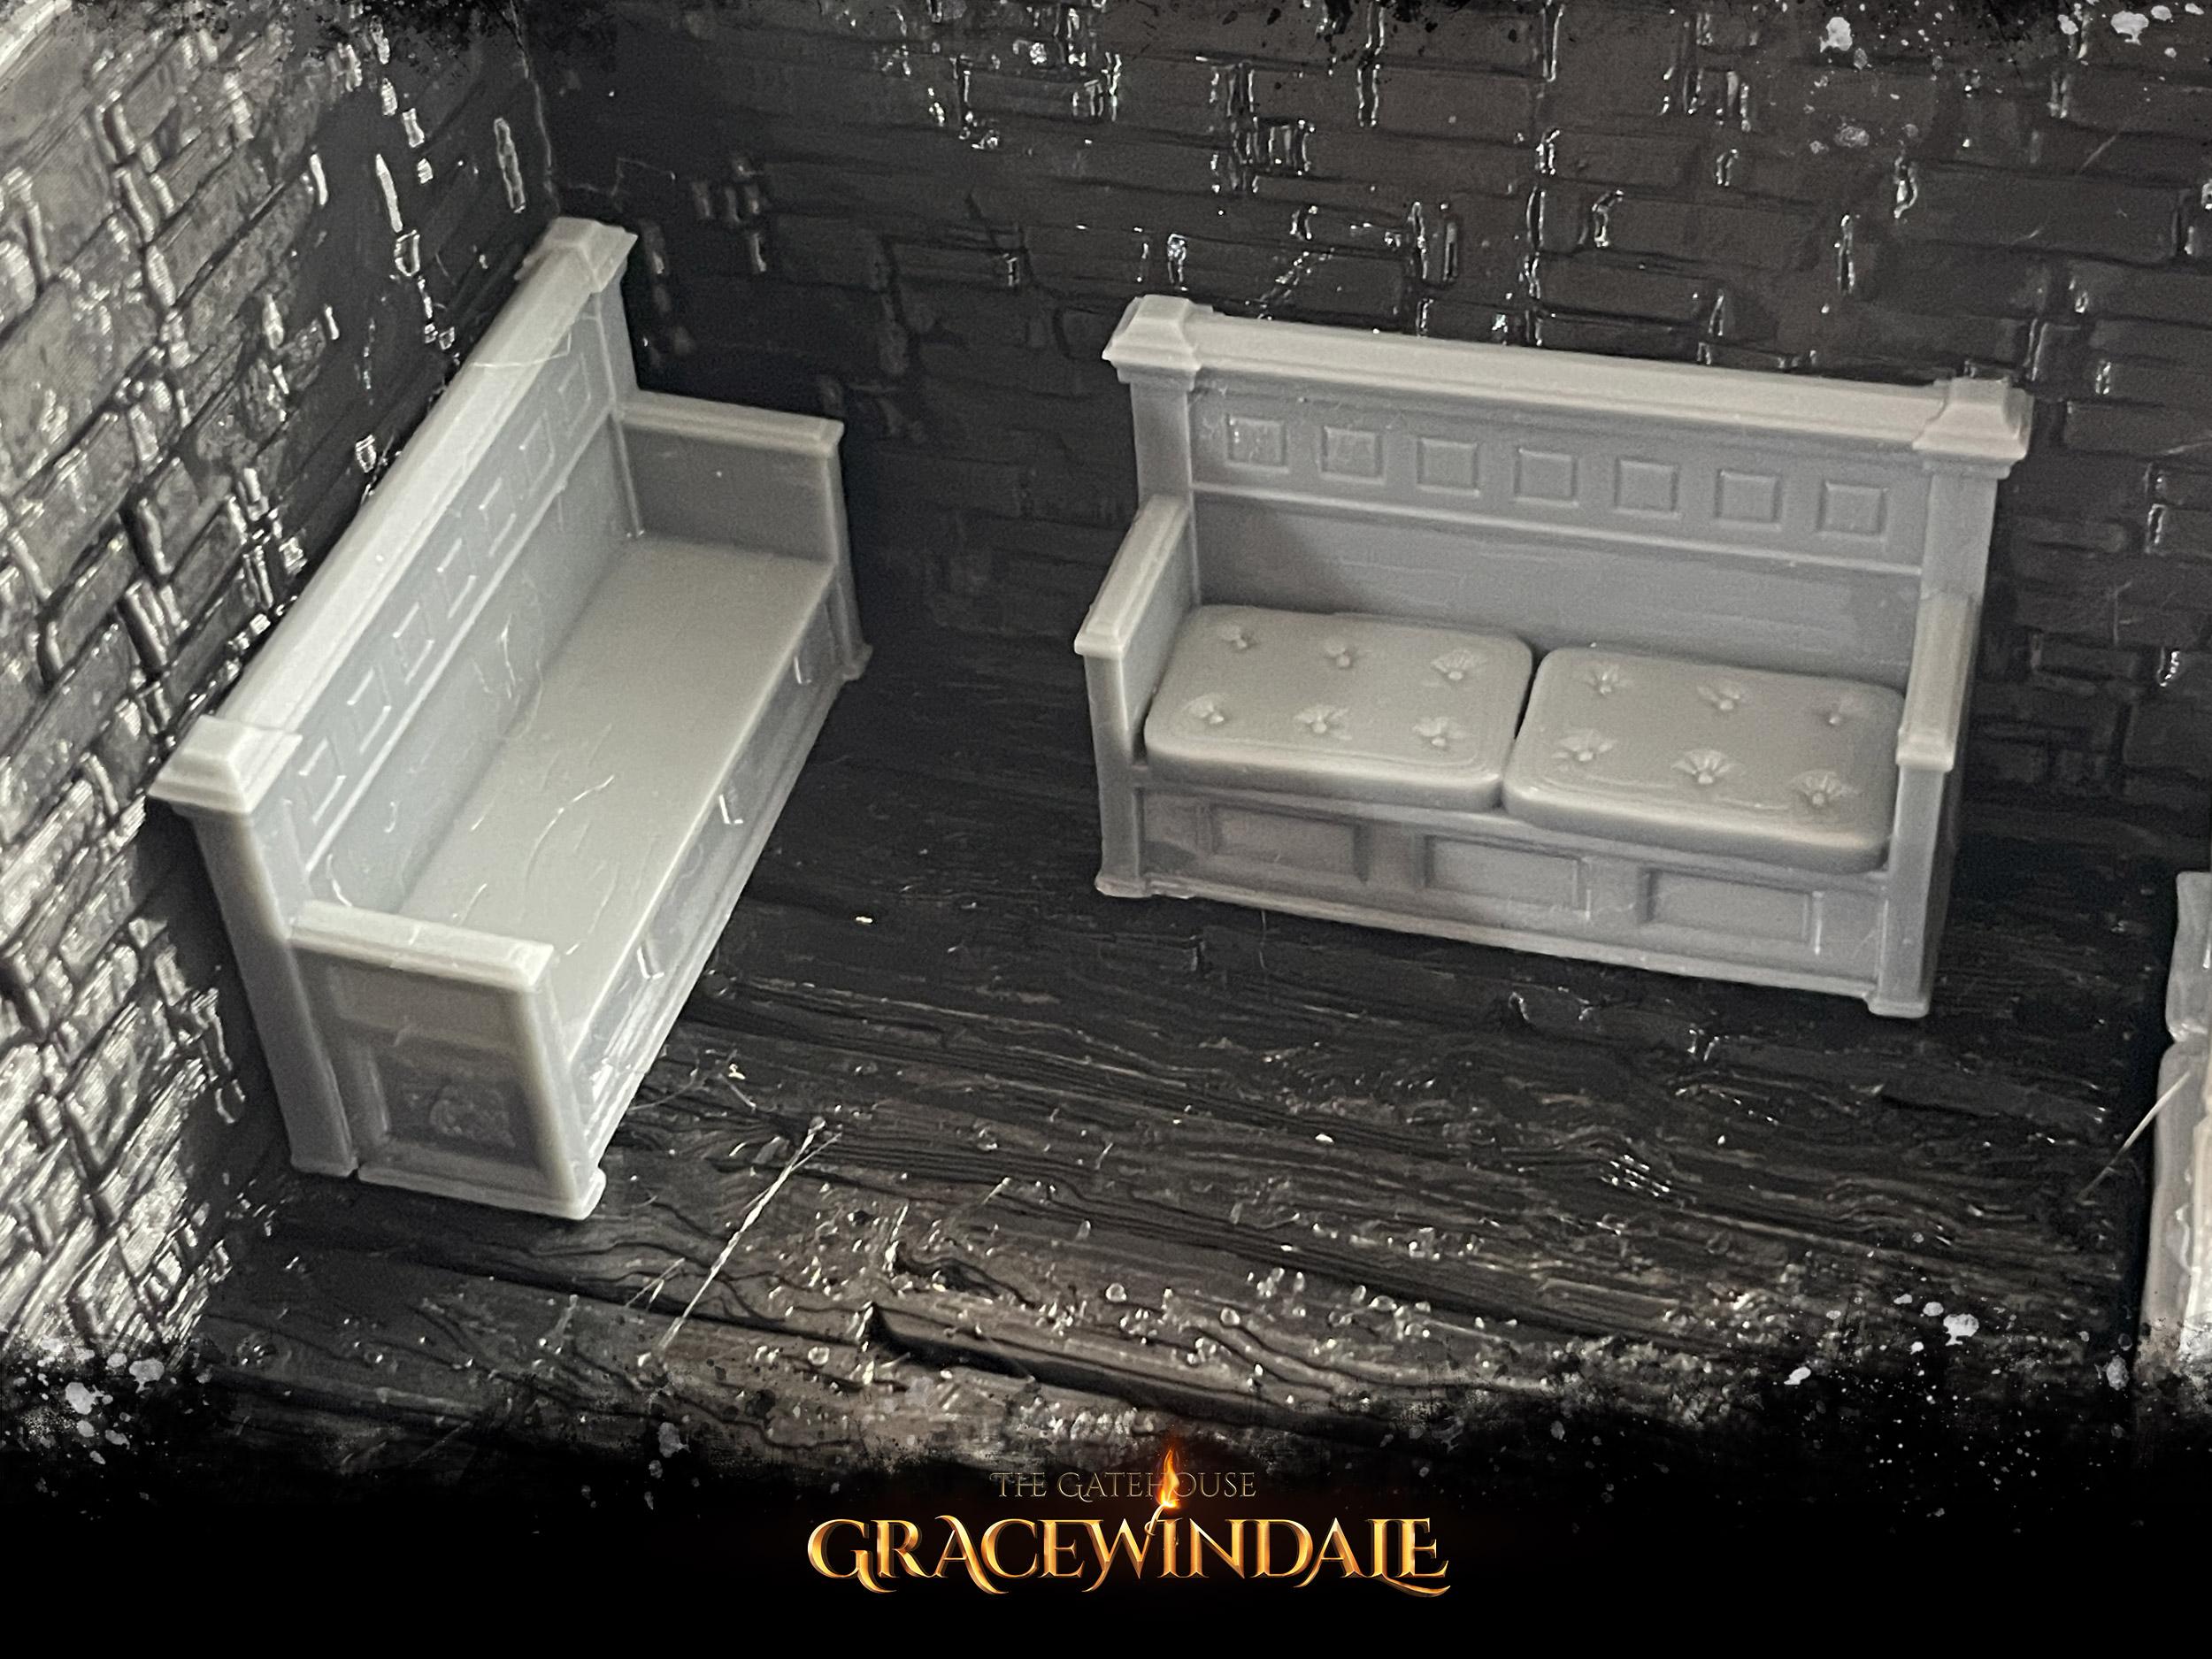 Gatehouse - Couch 3d model